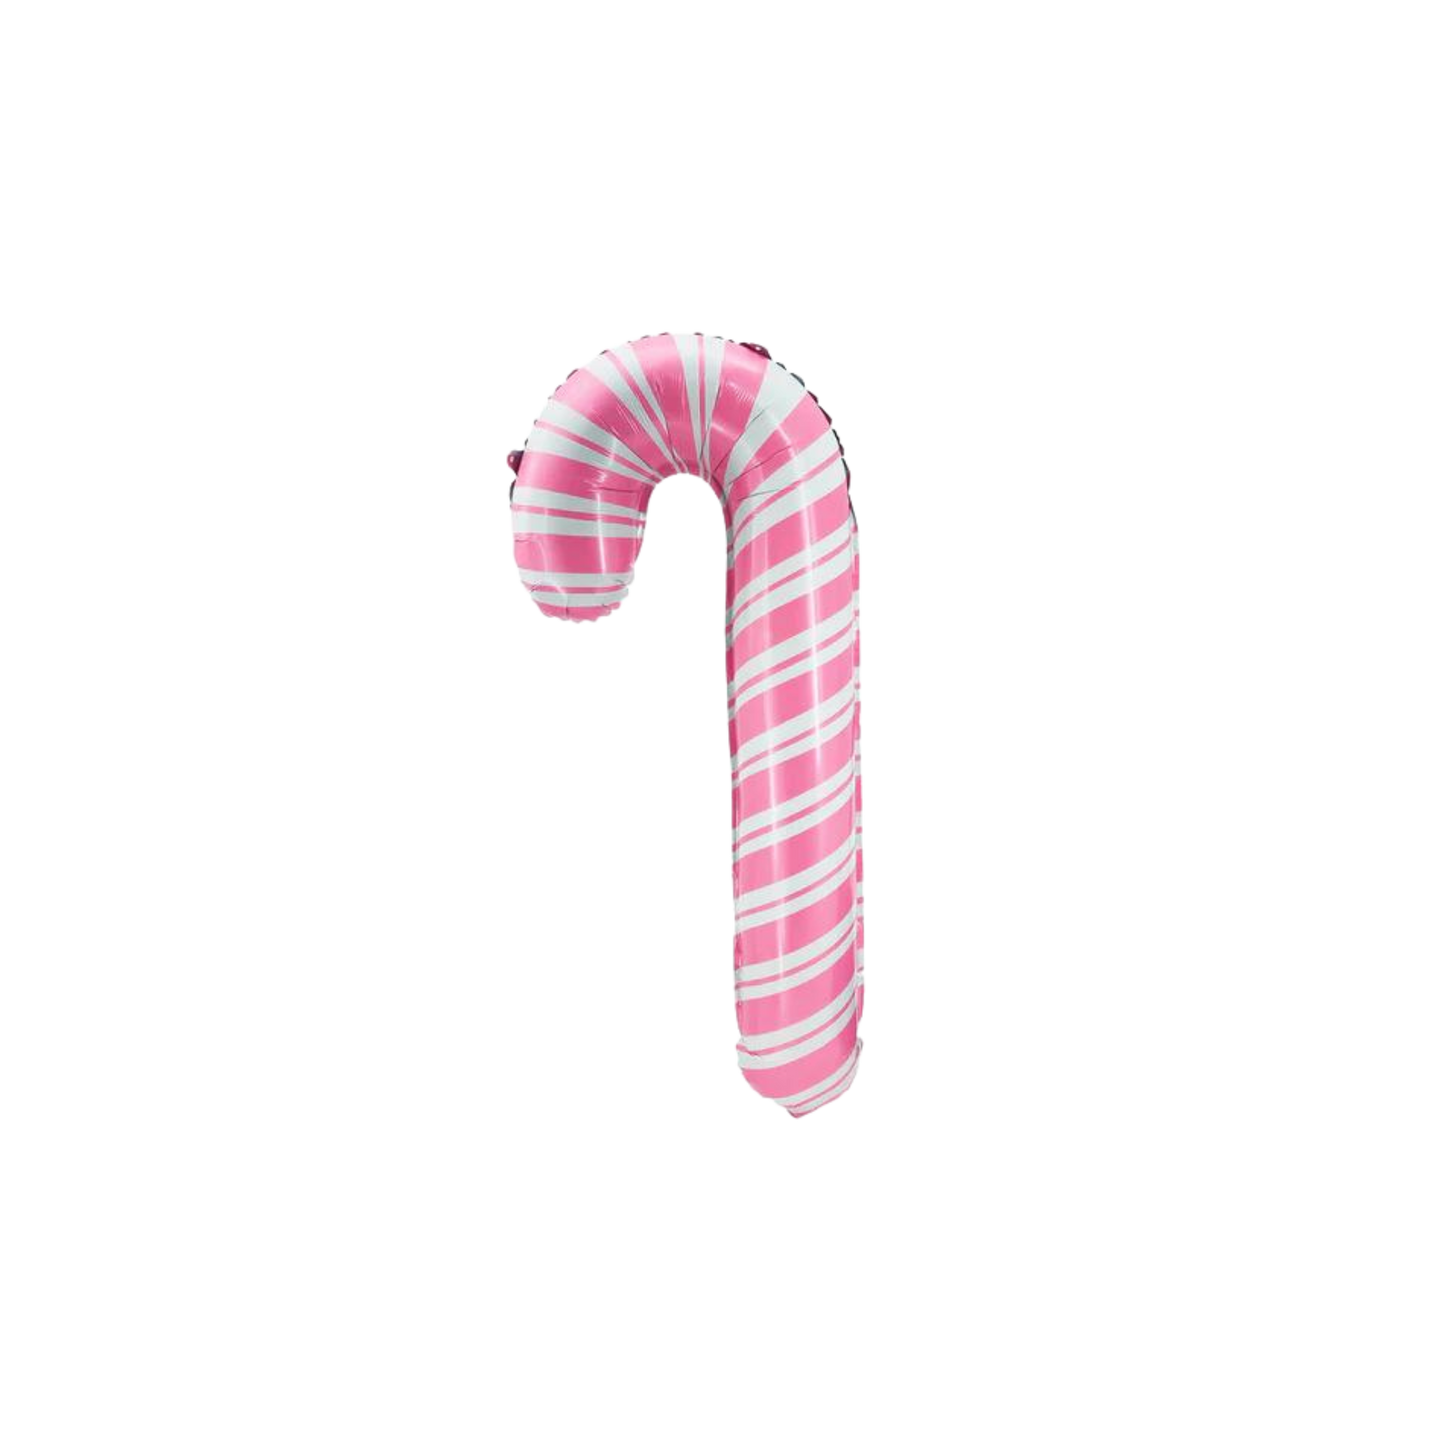 Pink Candy Cane Balloon (pack of 2)